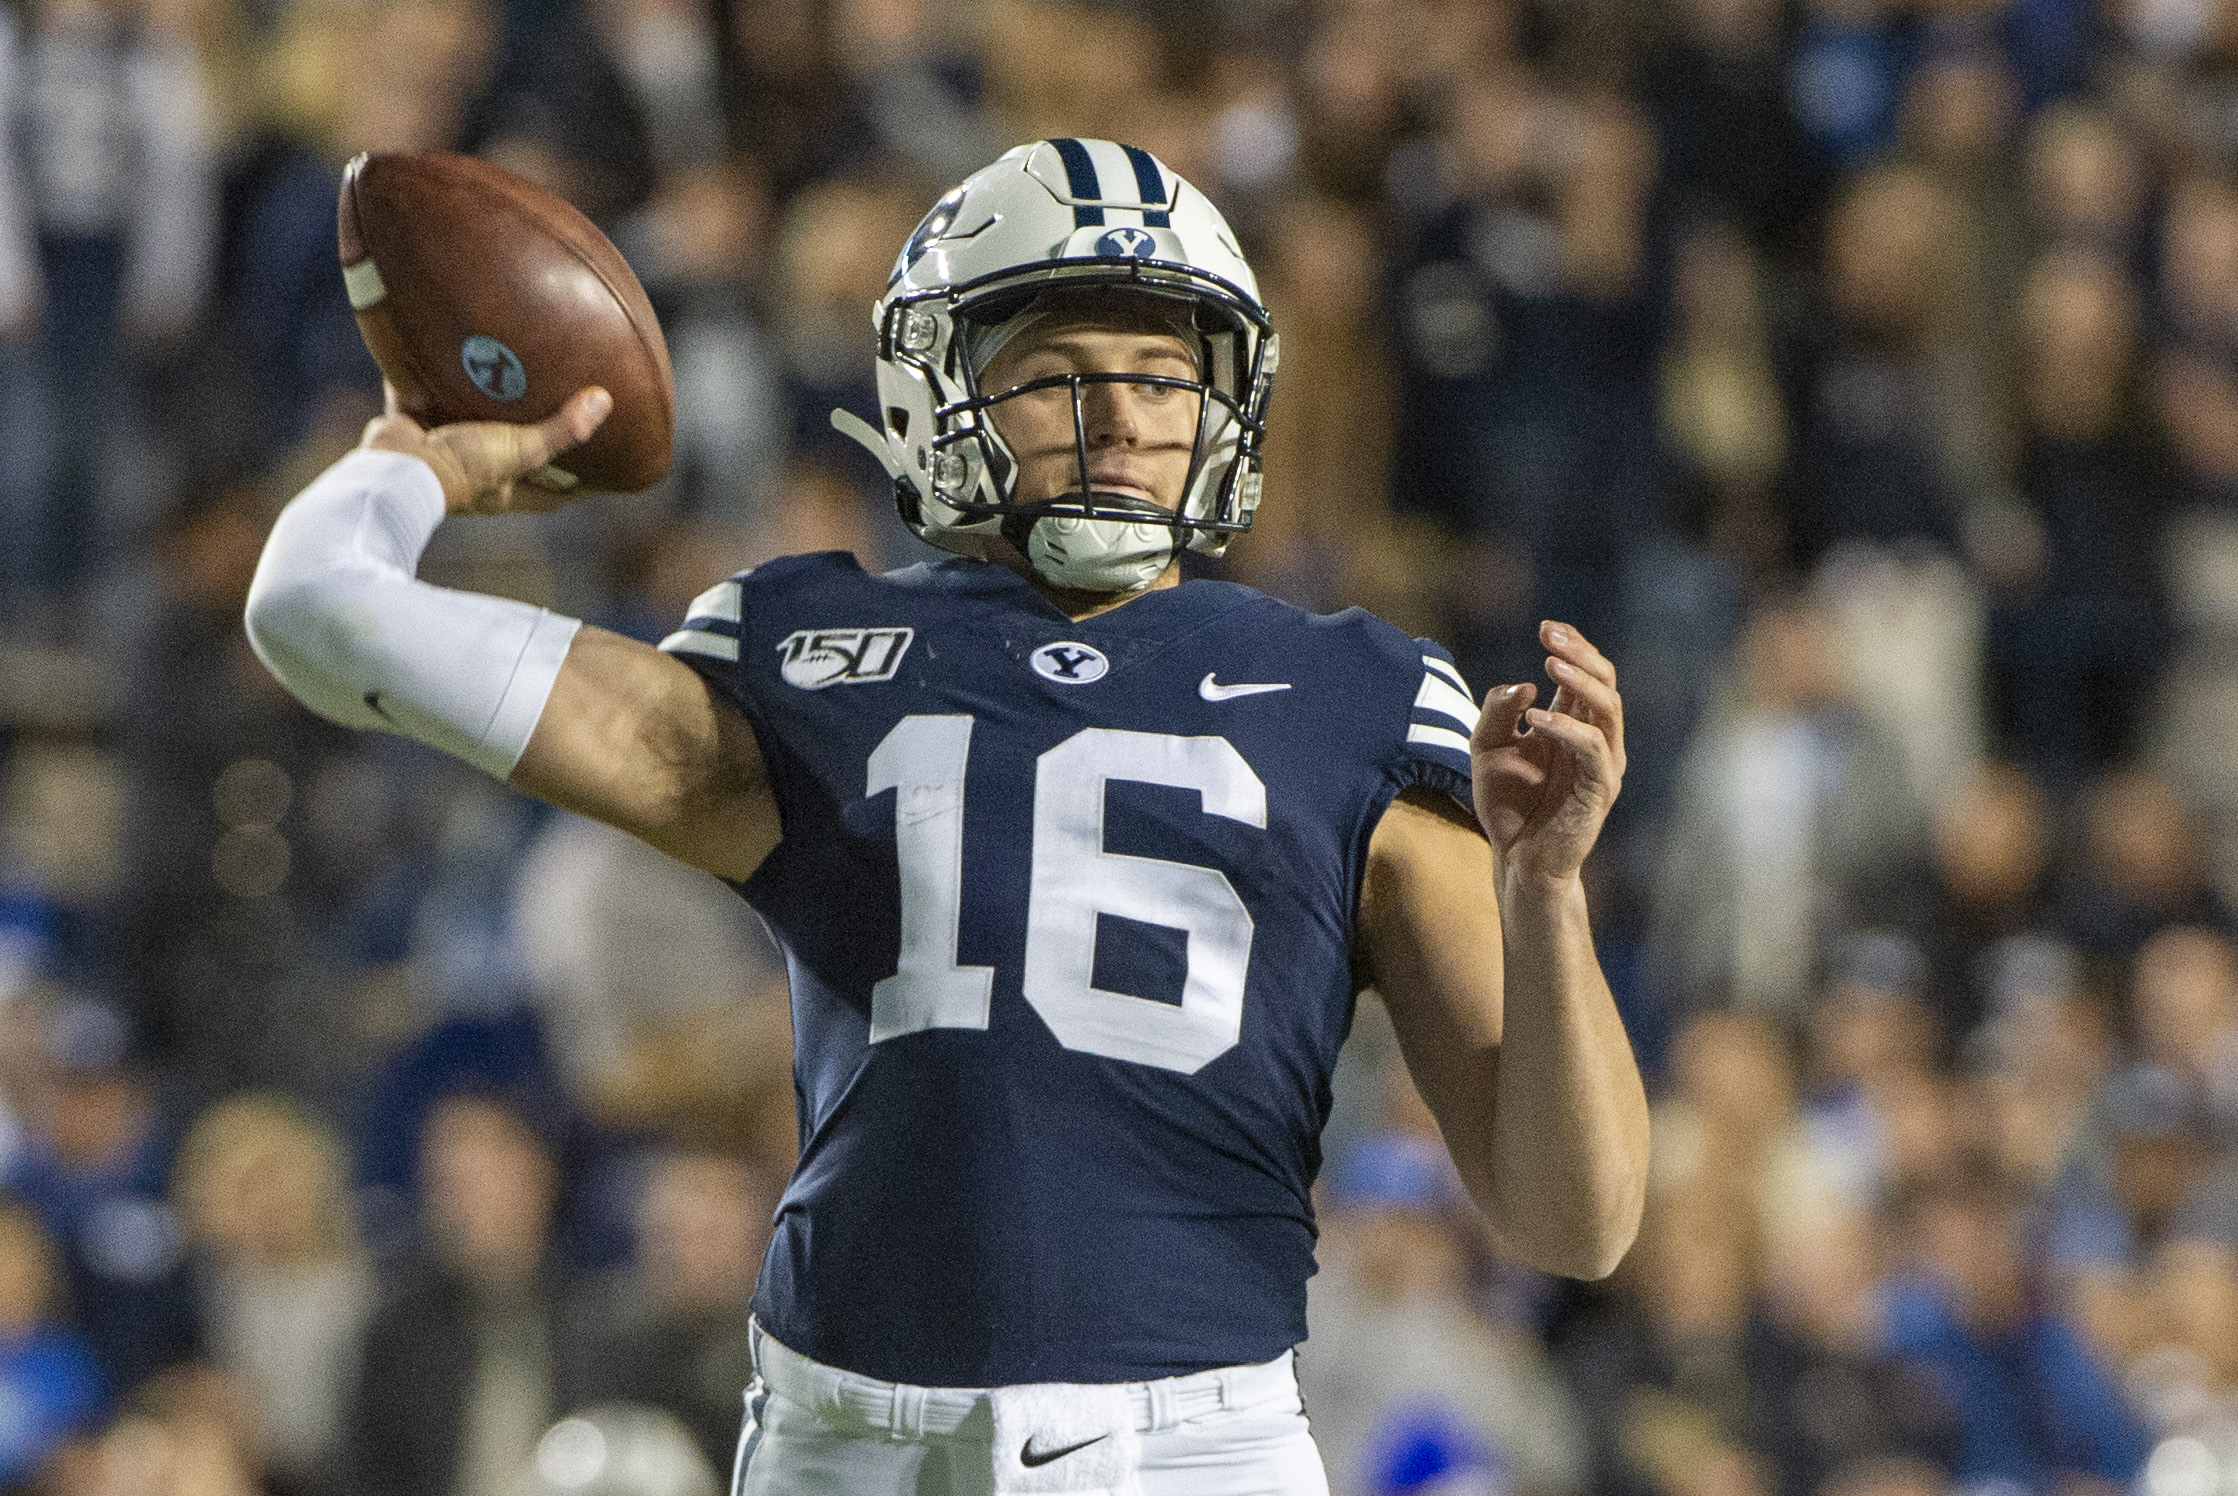 With Zach Wilson Entering The Nfl Draft Where Does That Leave The Byu Cougars At Quarterback